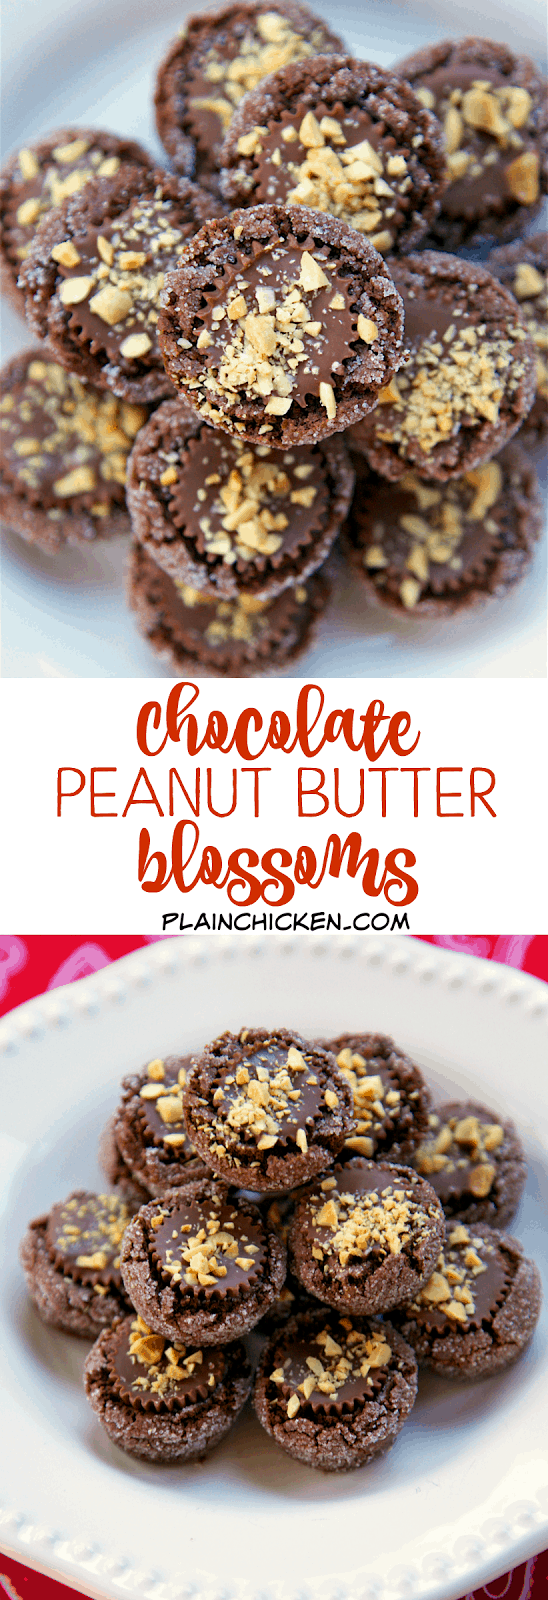 Chocolate Peanut Butter Blossoms - peanut butter chocolate cookies topped with a Reese's cup and chopped peanuts. OMG! Heaven! I have zero self-control around these cookies! Makes 5 dozen - great for sharing.